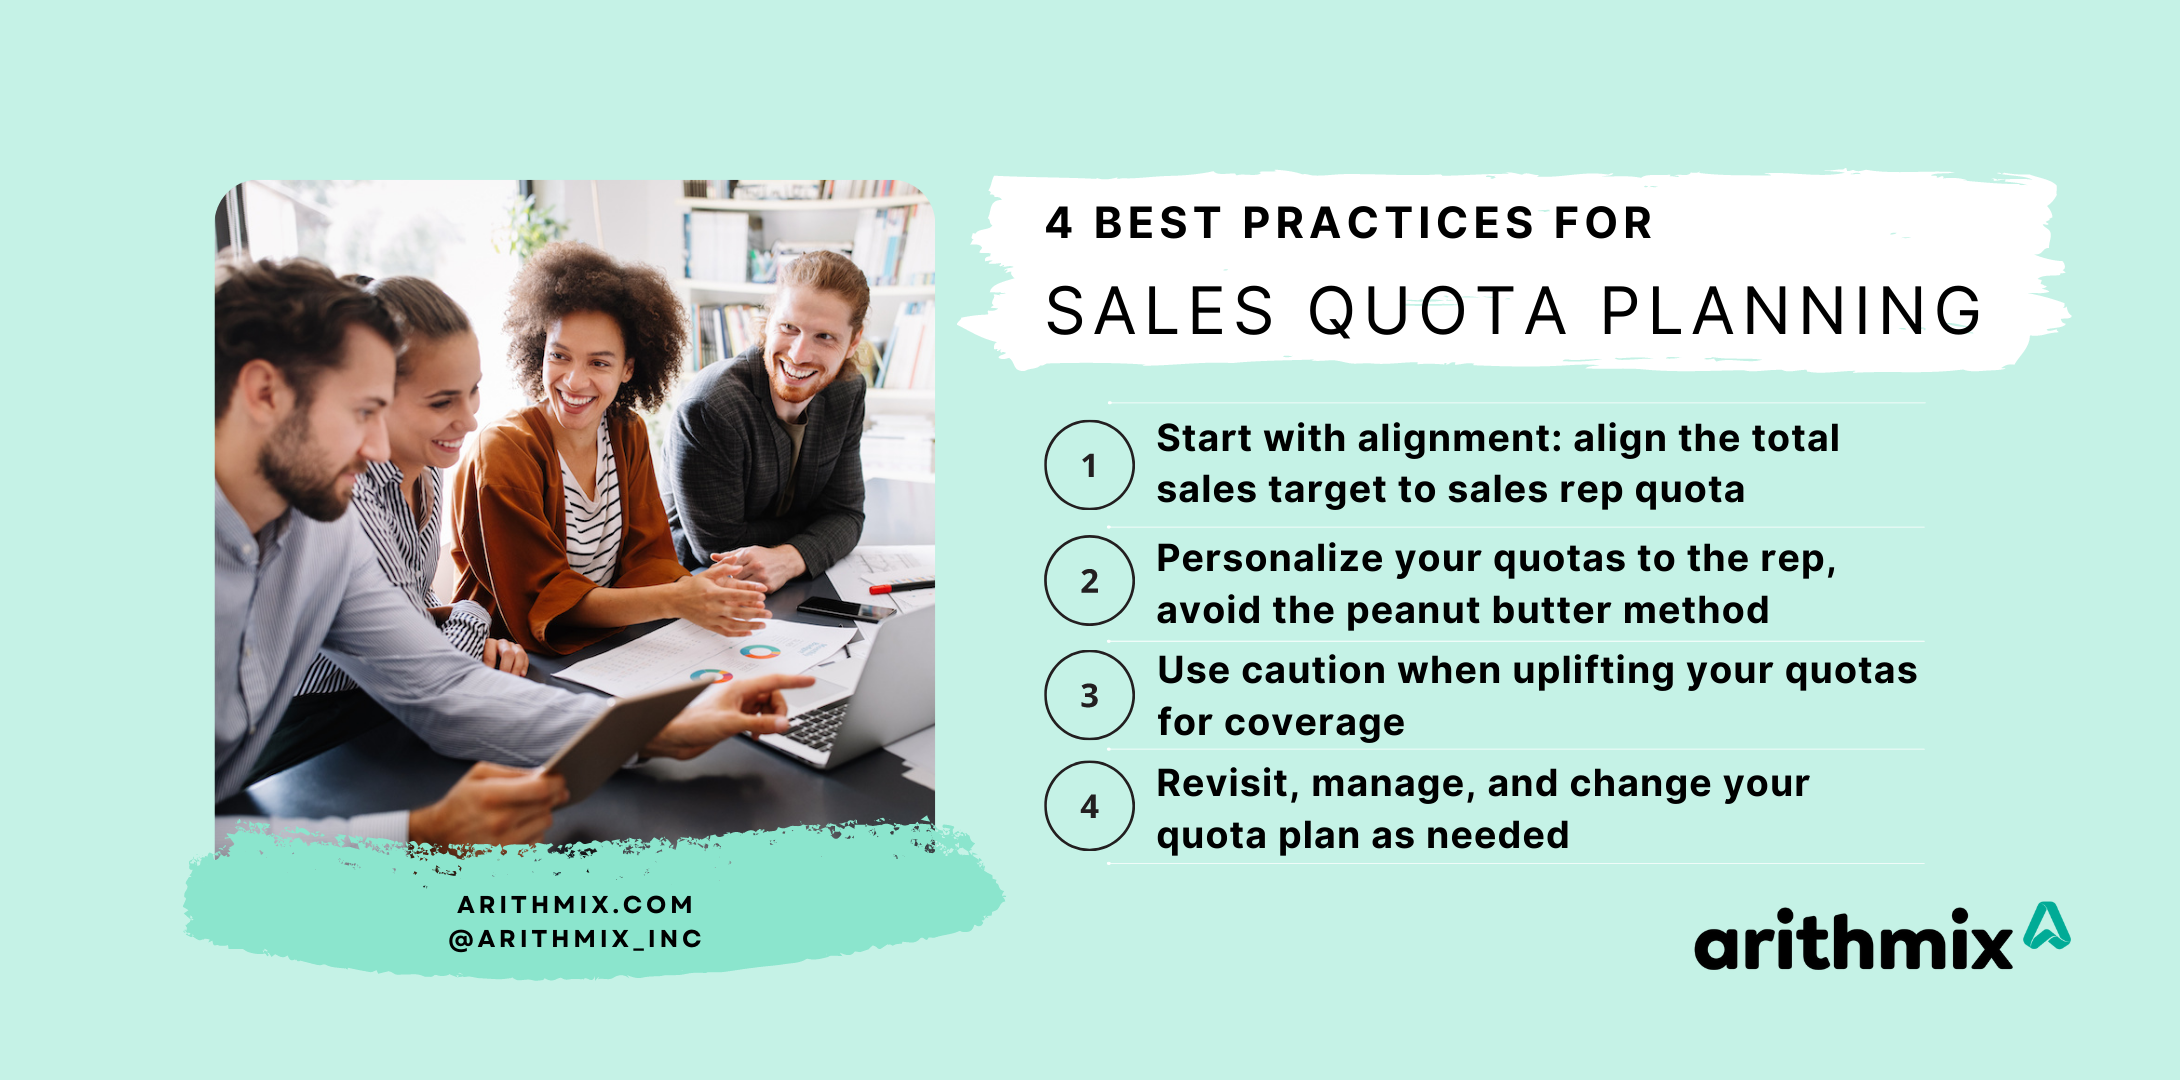 4 Best Practices and Tips for Sales Quota Planning. Start with alignment, personalize quotas to each rep, use caution when uplifting quotas for coverage, revisit and manage your quota plan as needed. 